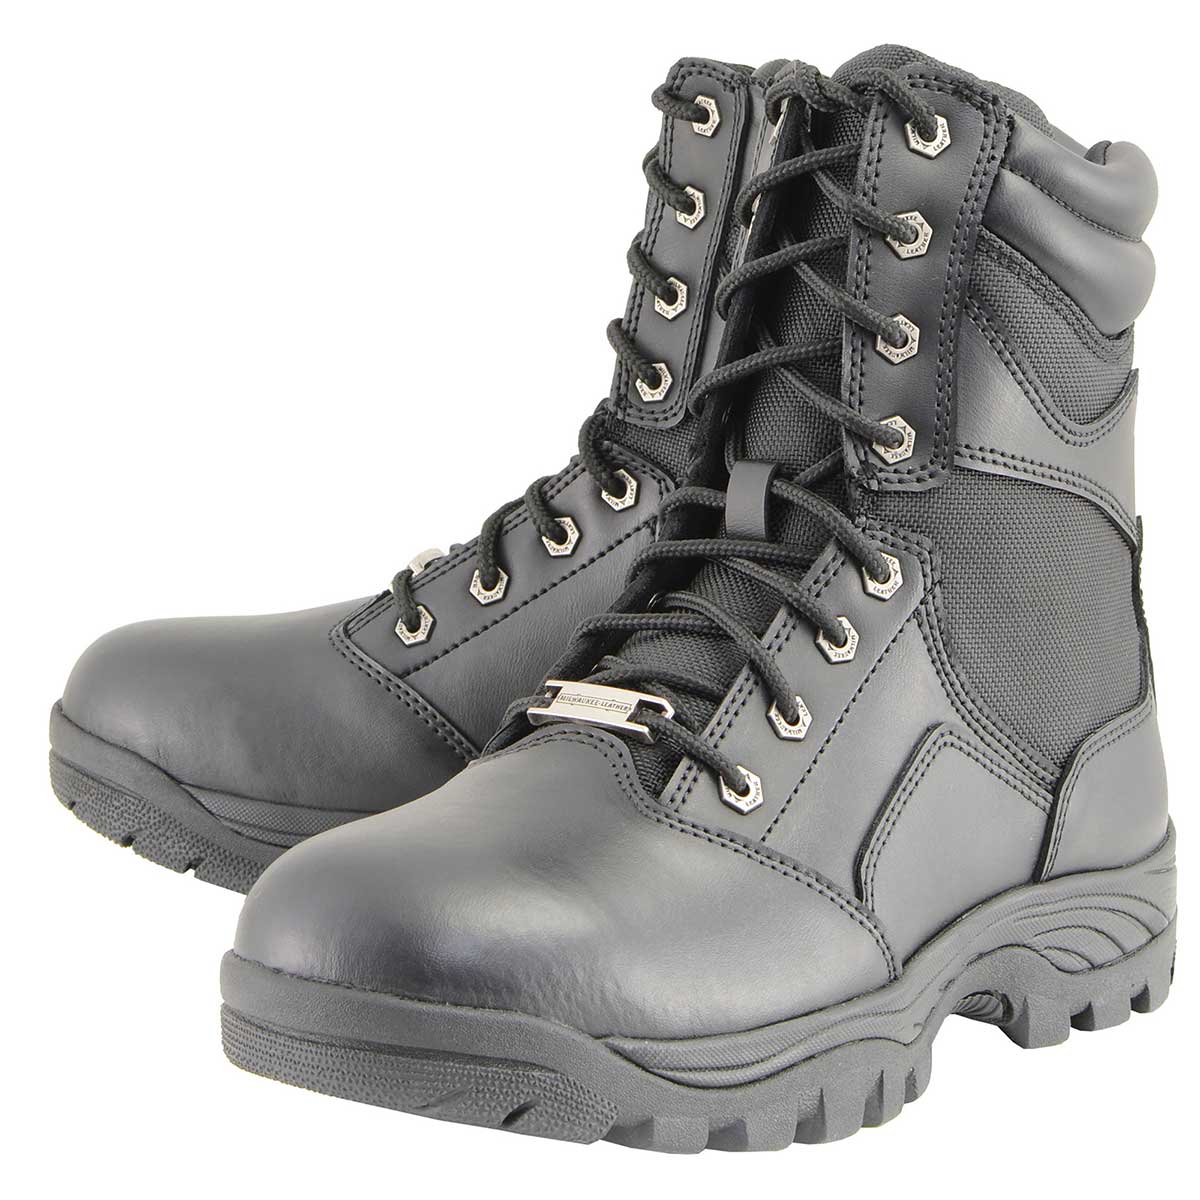 Milwaukee Leather MBM9135 Men’s Black Lace-Up Waterproof Swat Style-Tactical Motorcycle Boots